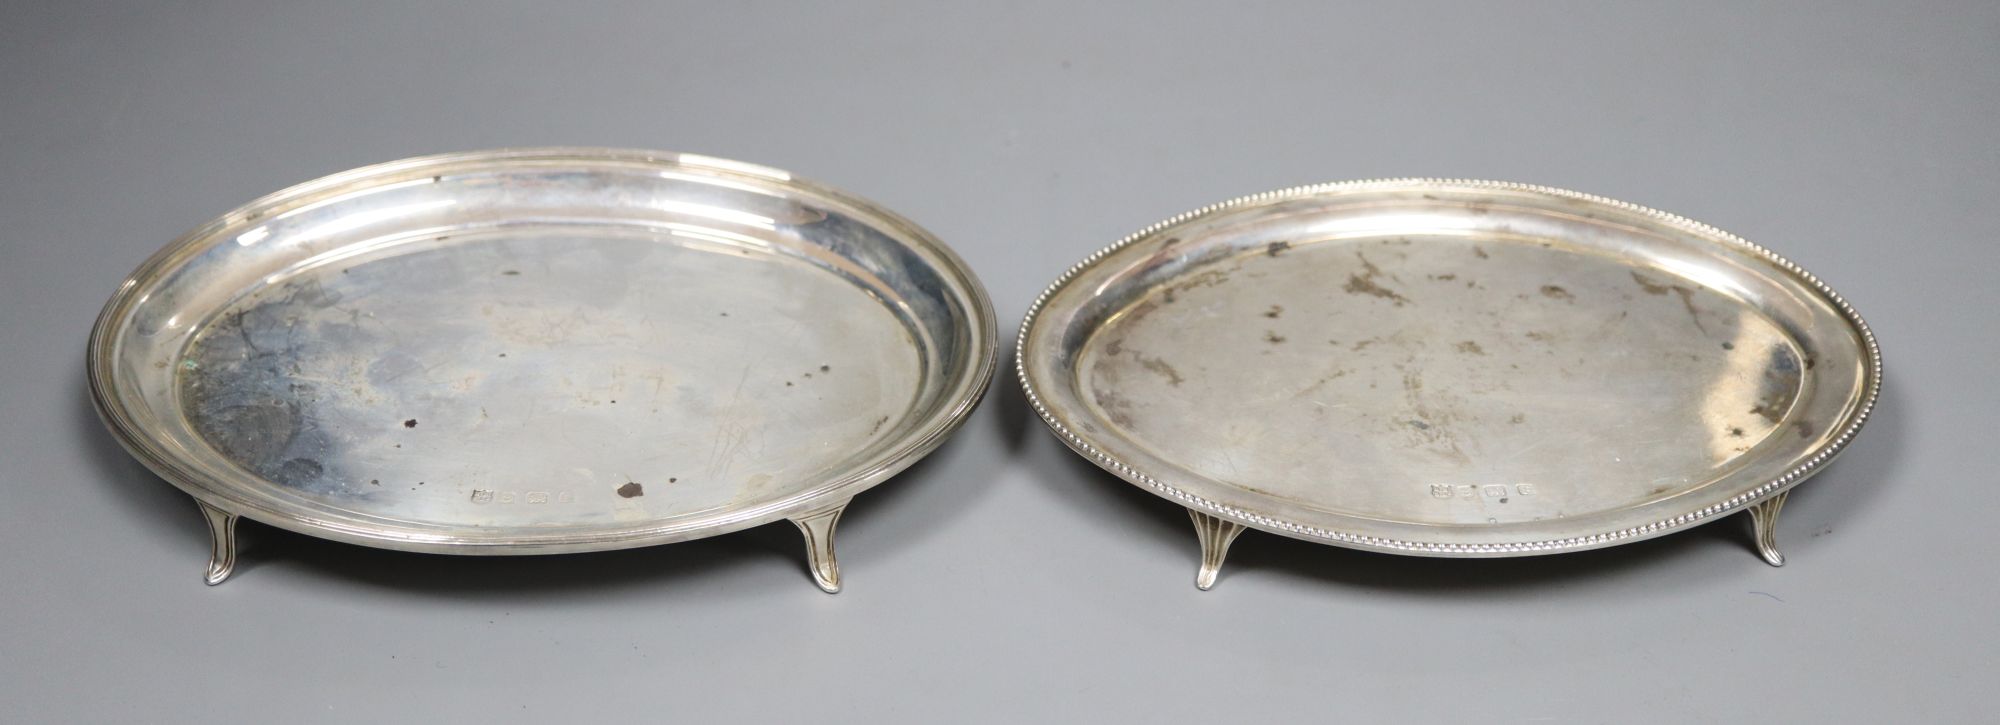 Two 1930s George III style silver teapot stands, Barker Brothers Silver Ltd, Birmingham, 1930, 17.6cm & 18.3cm, 10.5oz.